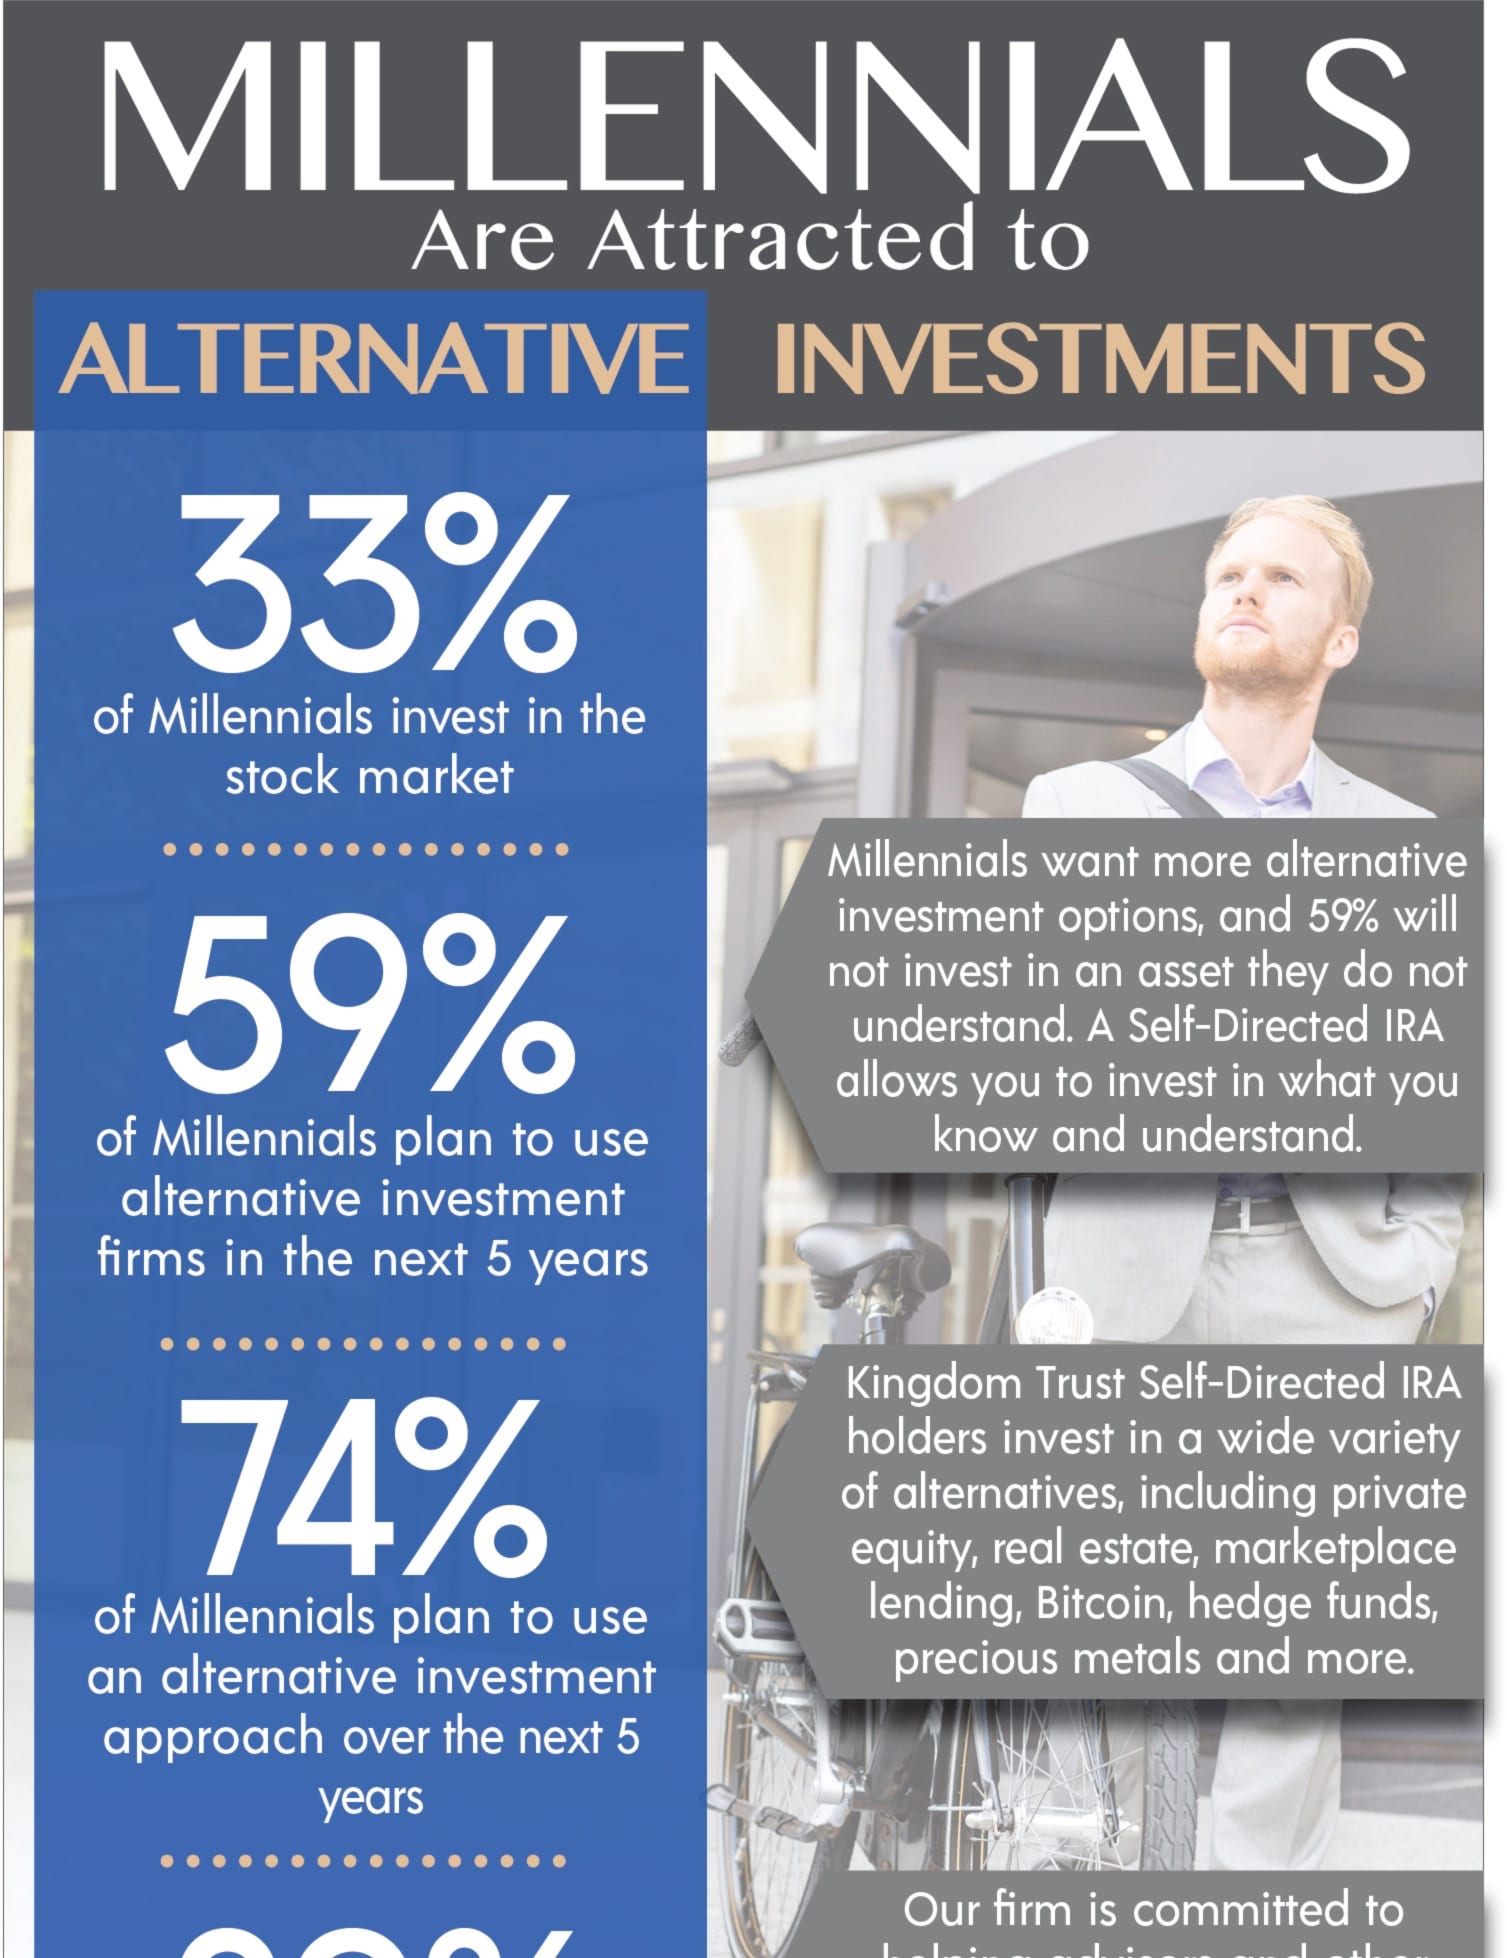 Millennials are Attracted to Alternative Investments